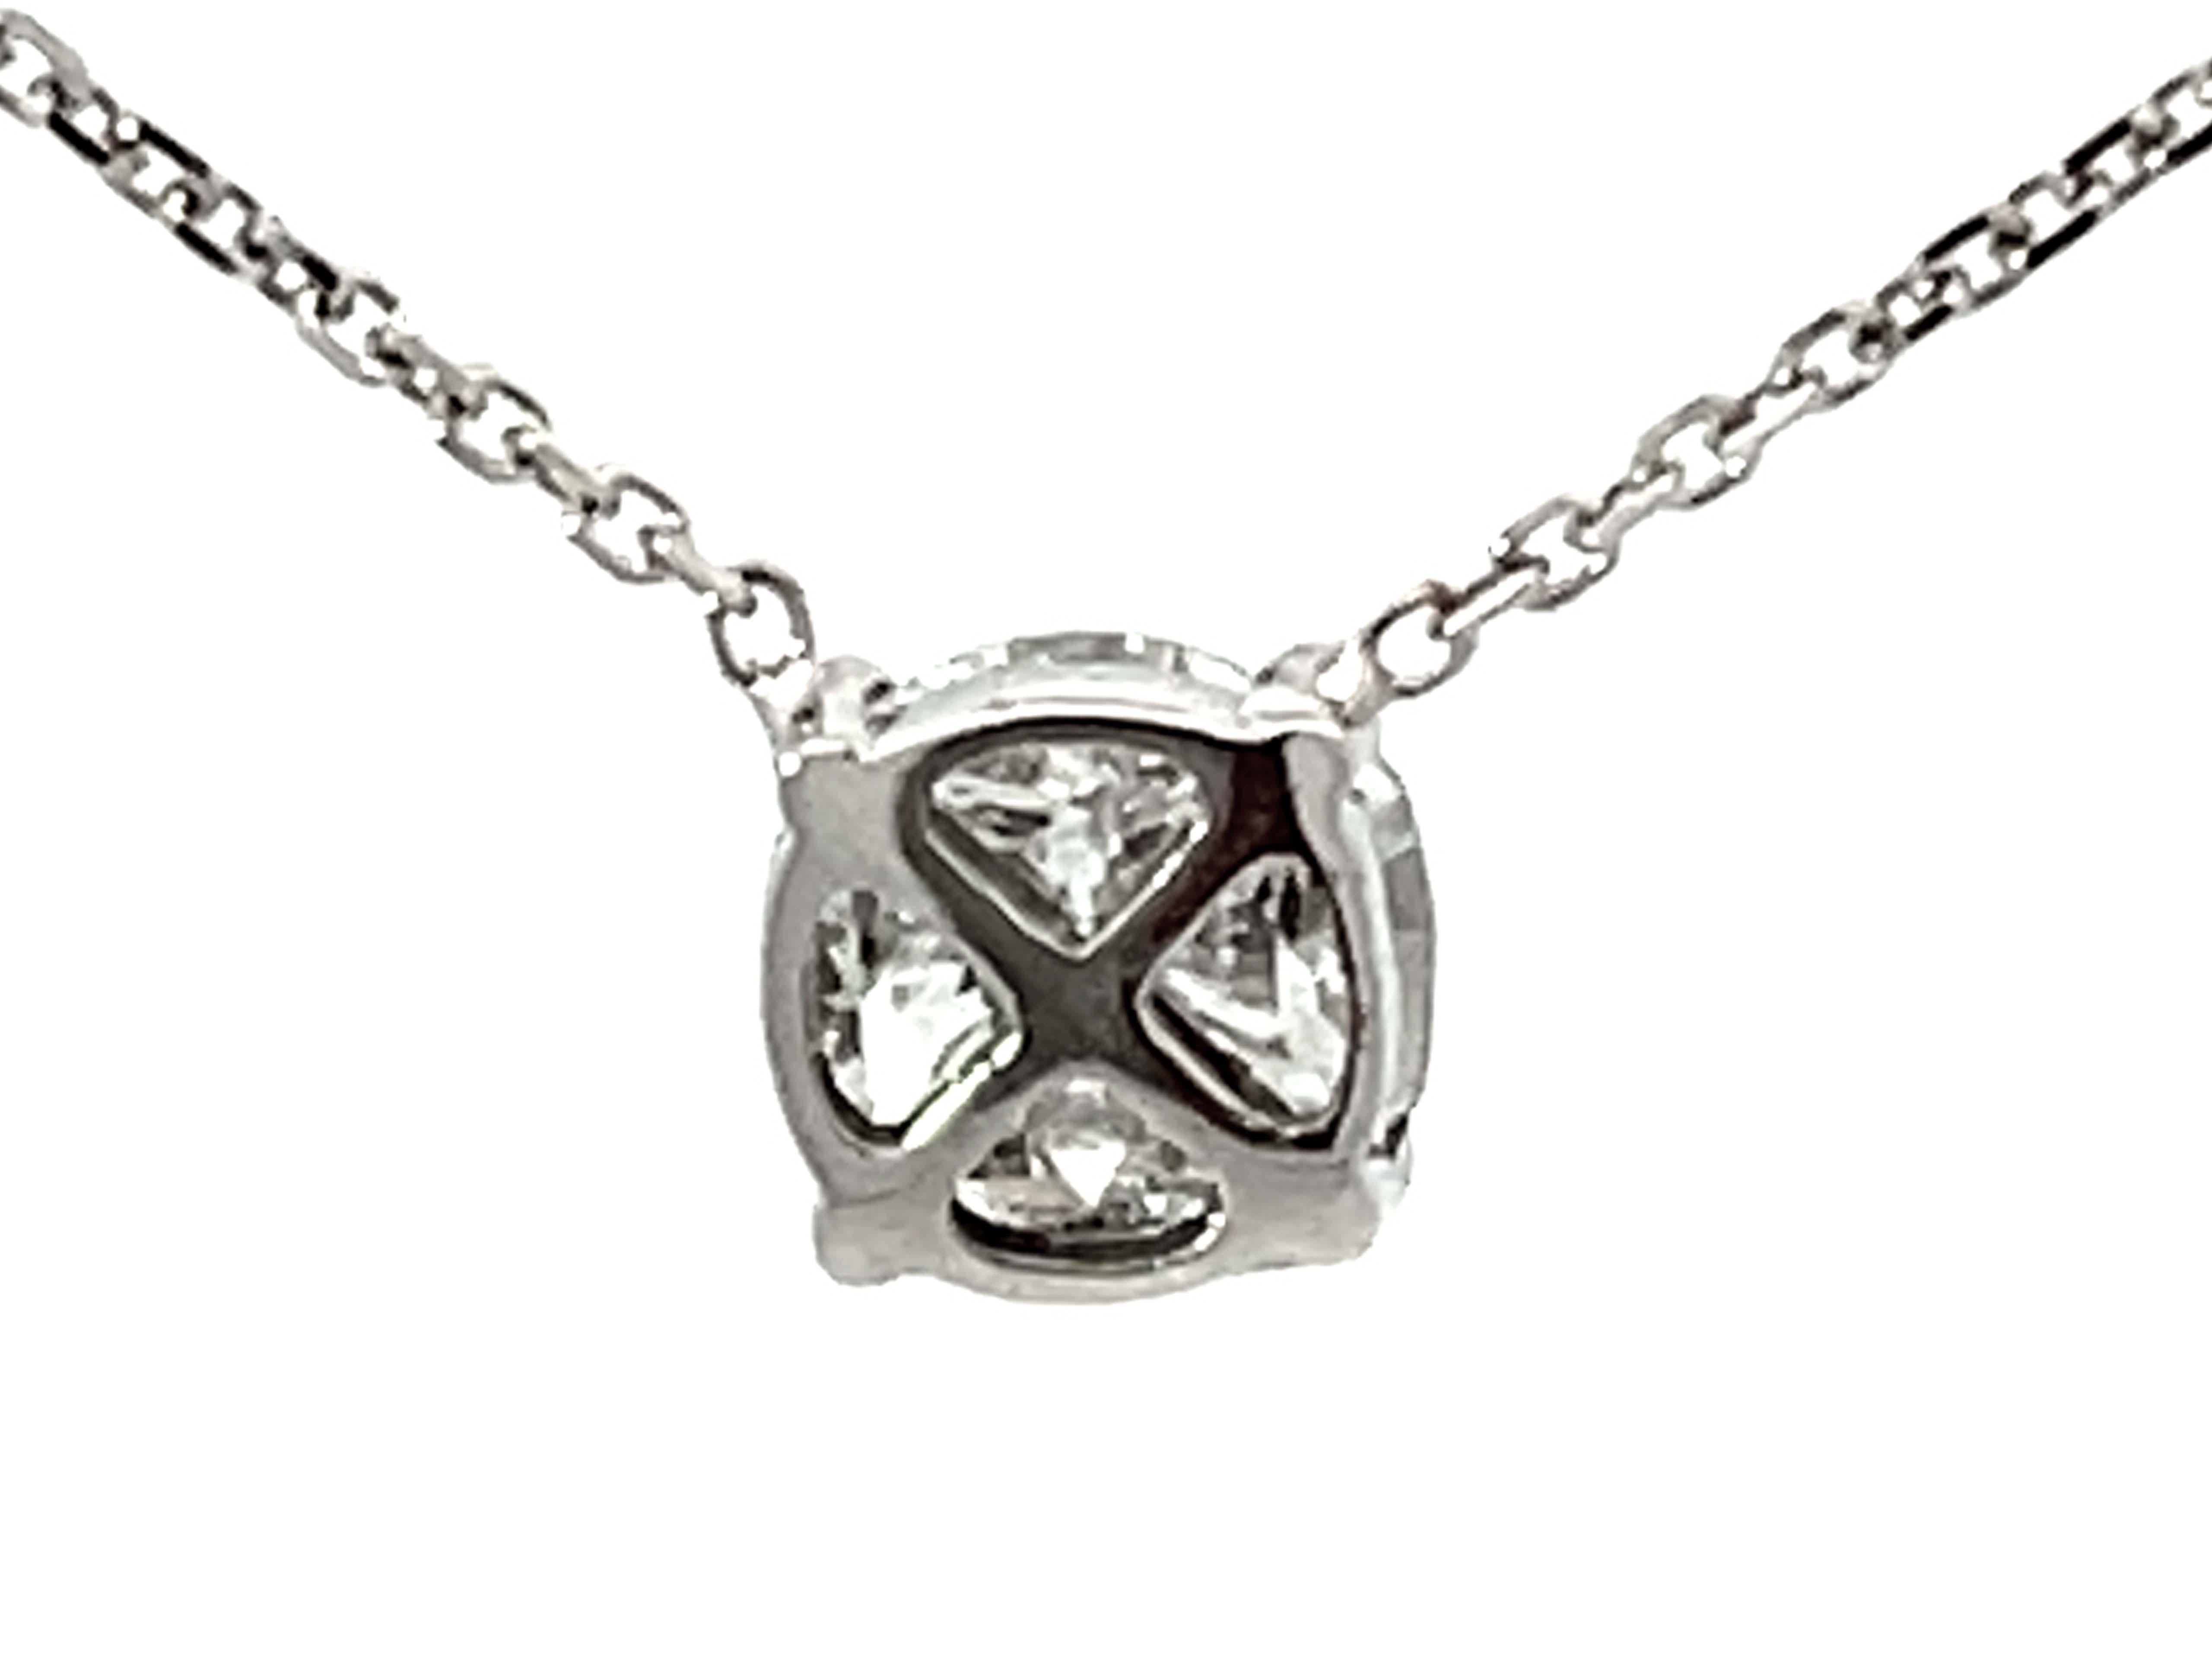 Piecut Diamond Necklace Solid 18k White Gold For Sale 1